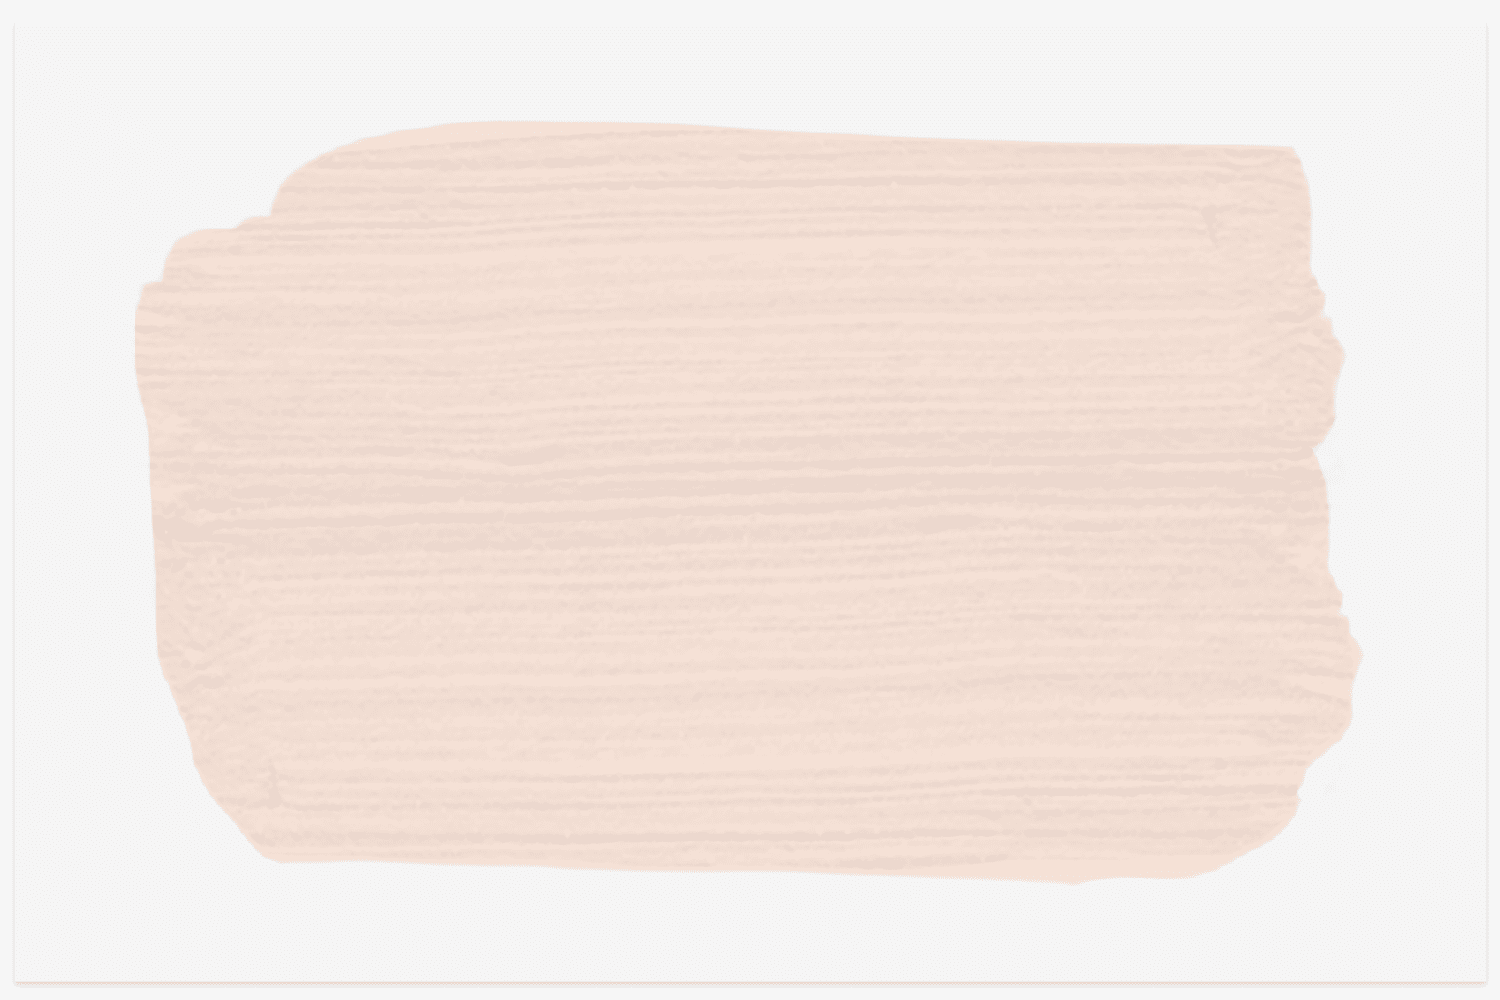 Swatch of Pink Ground by Farrow & Ball